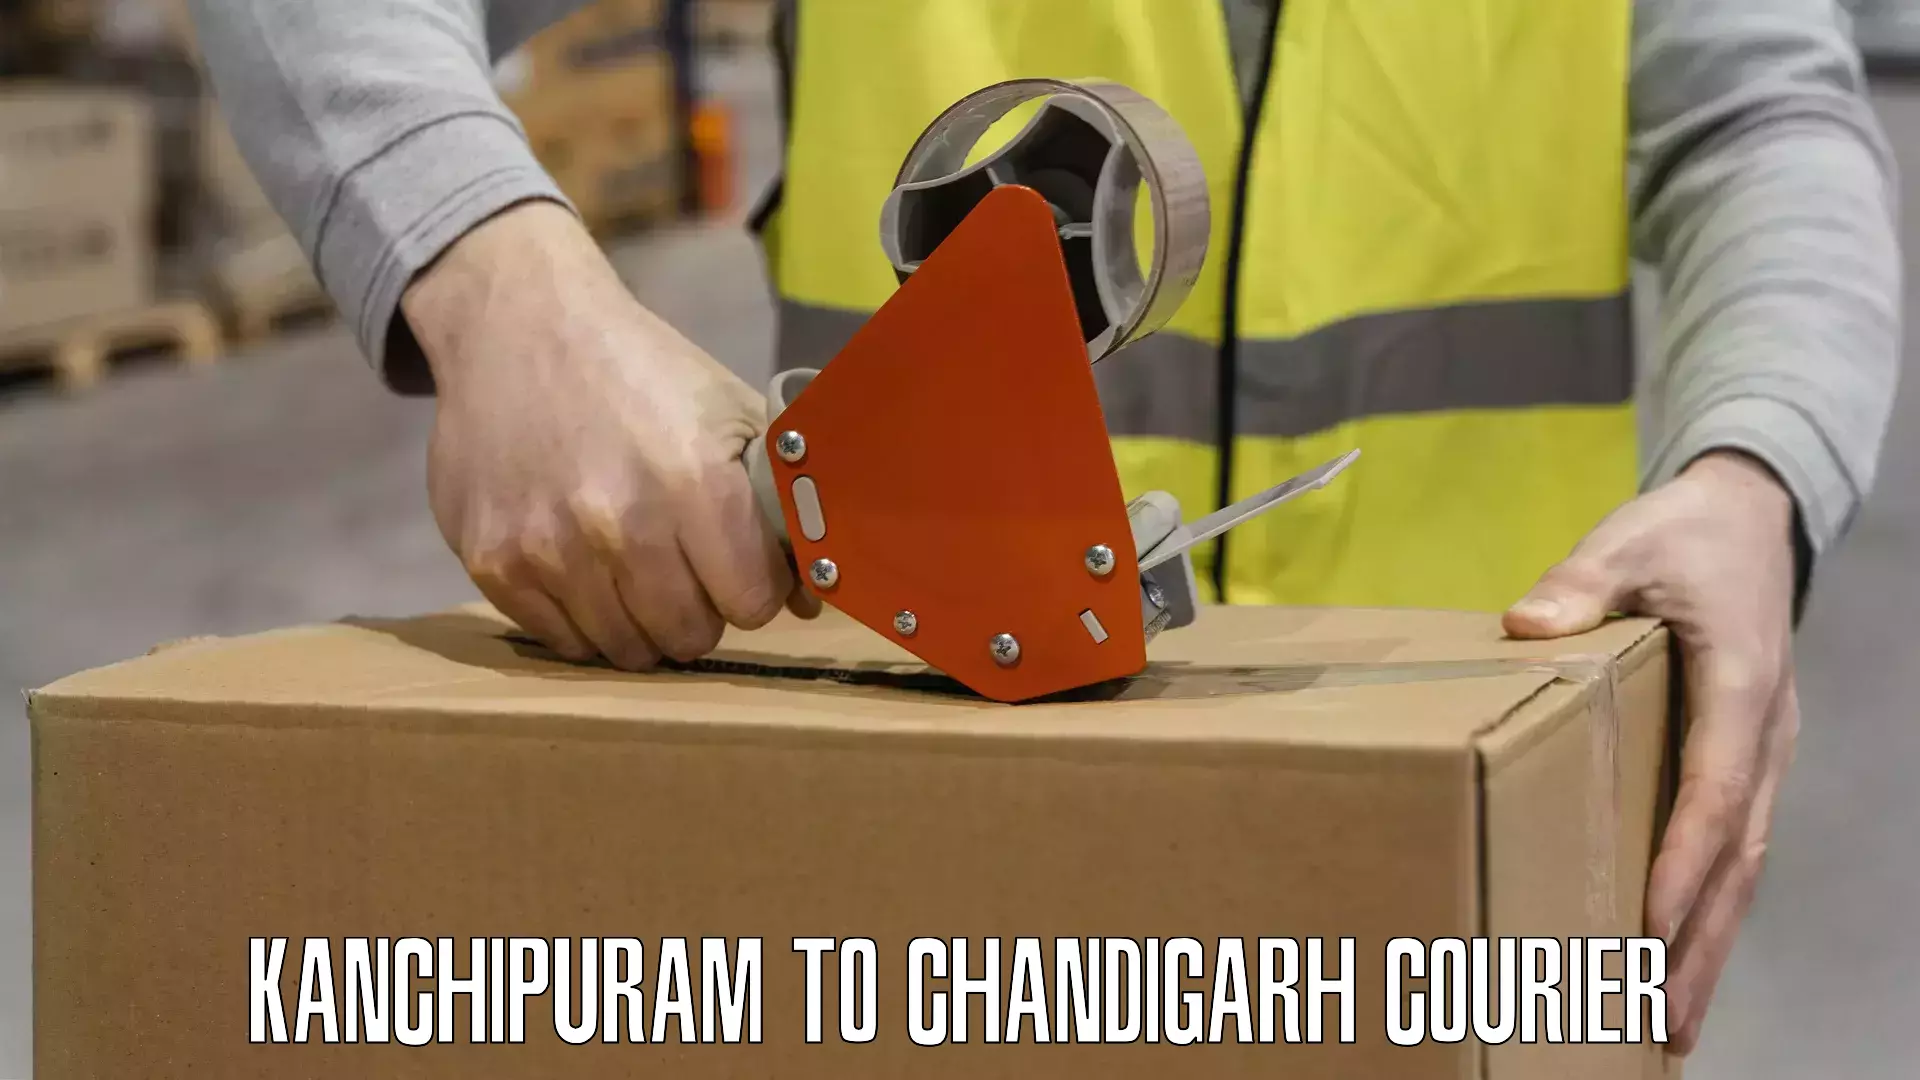 Multi-national courier services Kanchipuram to Chandigarh